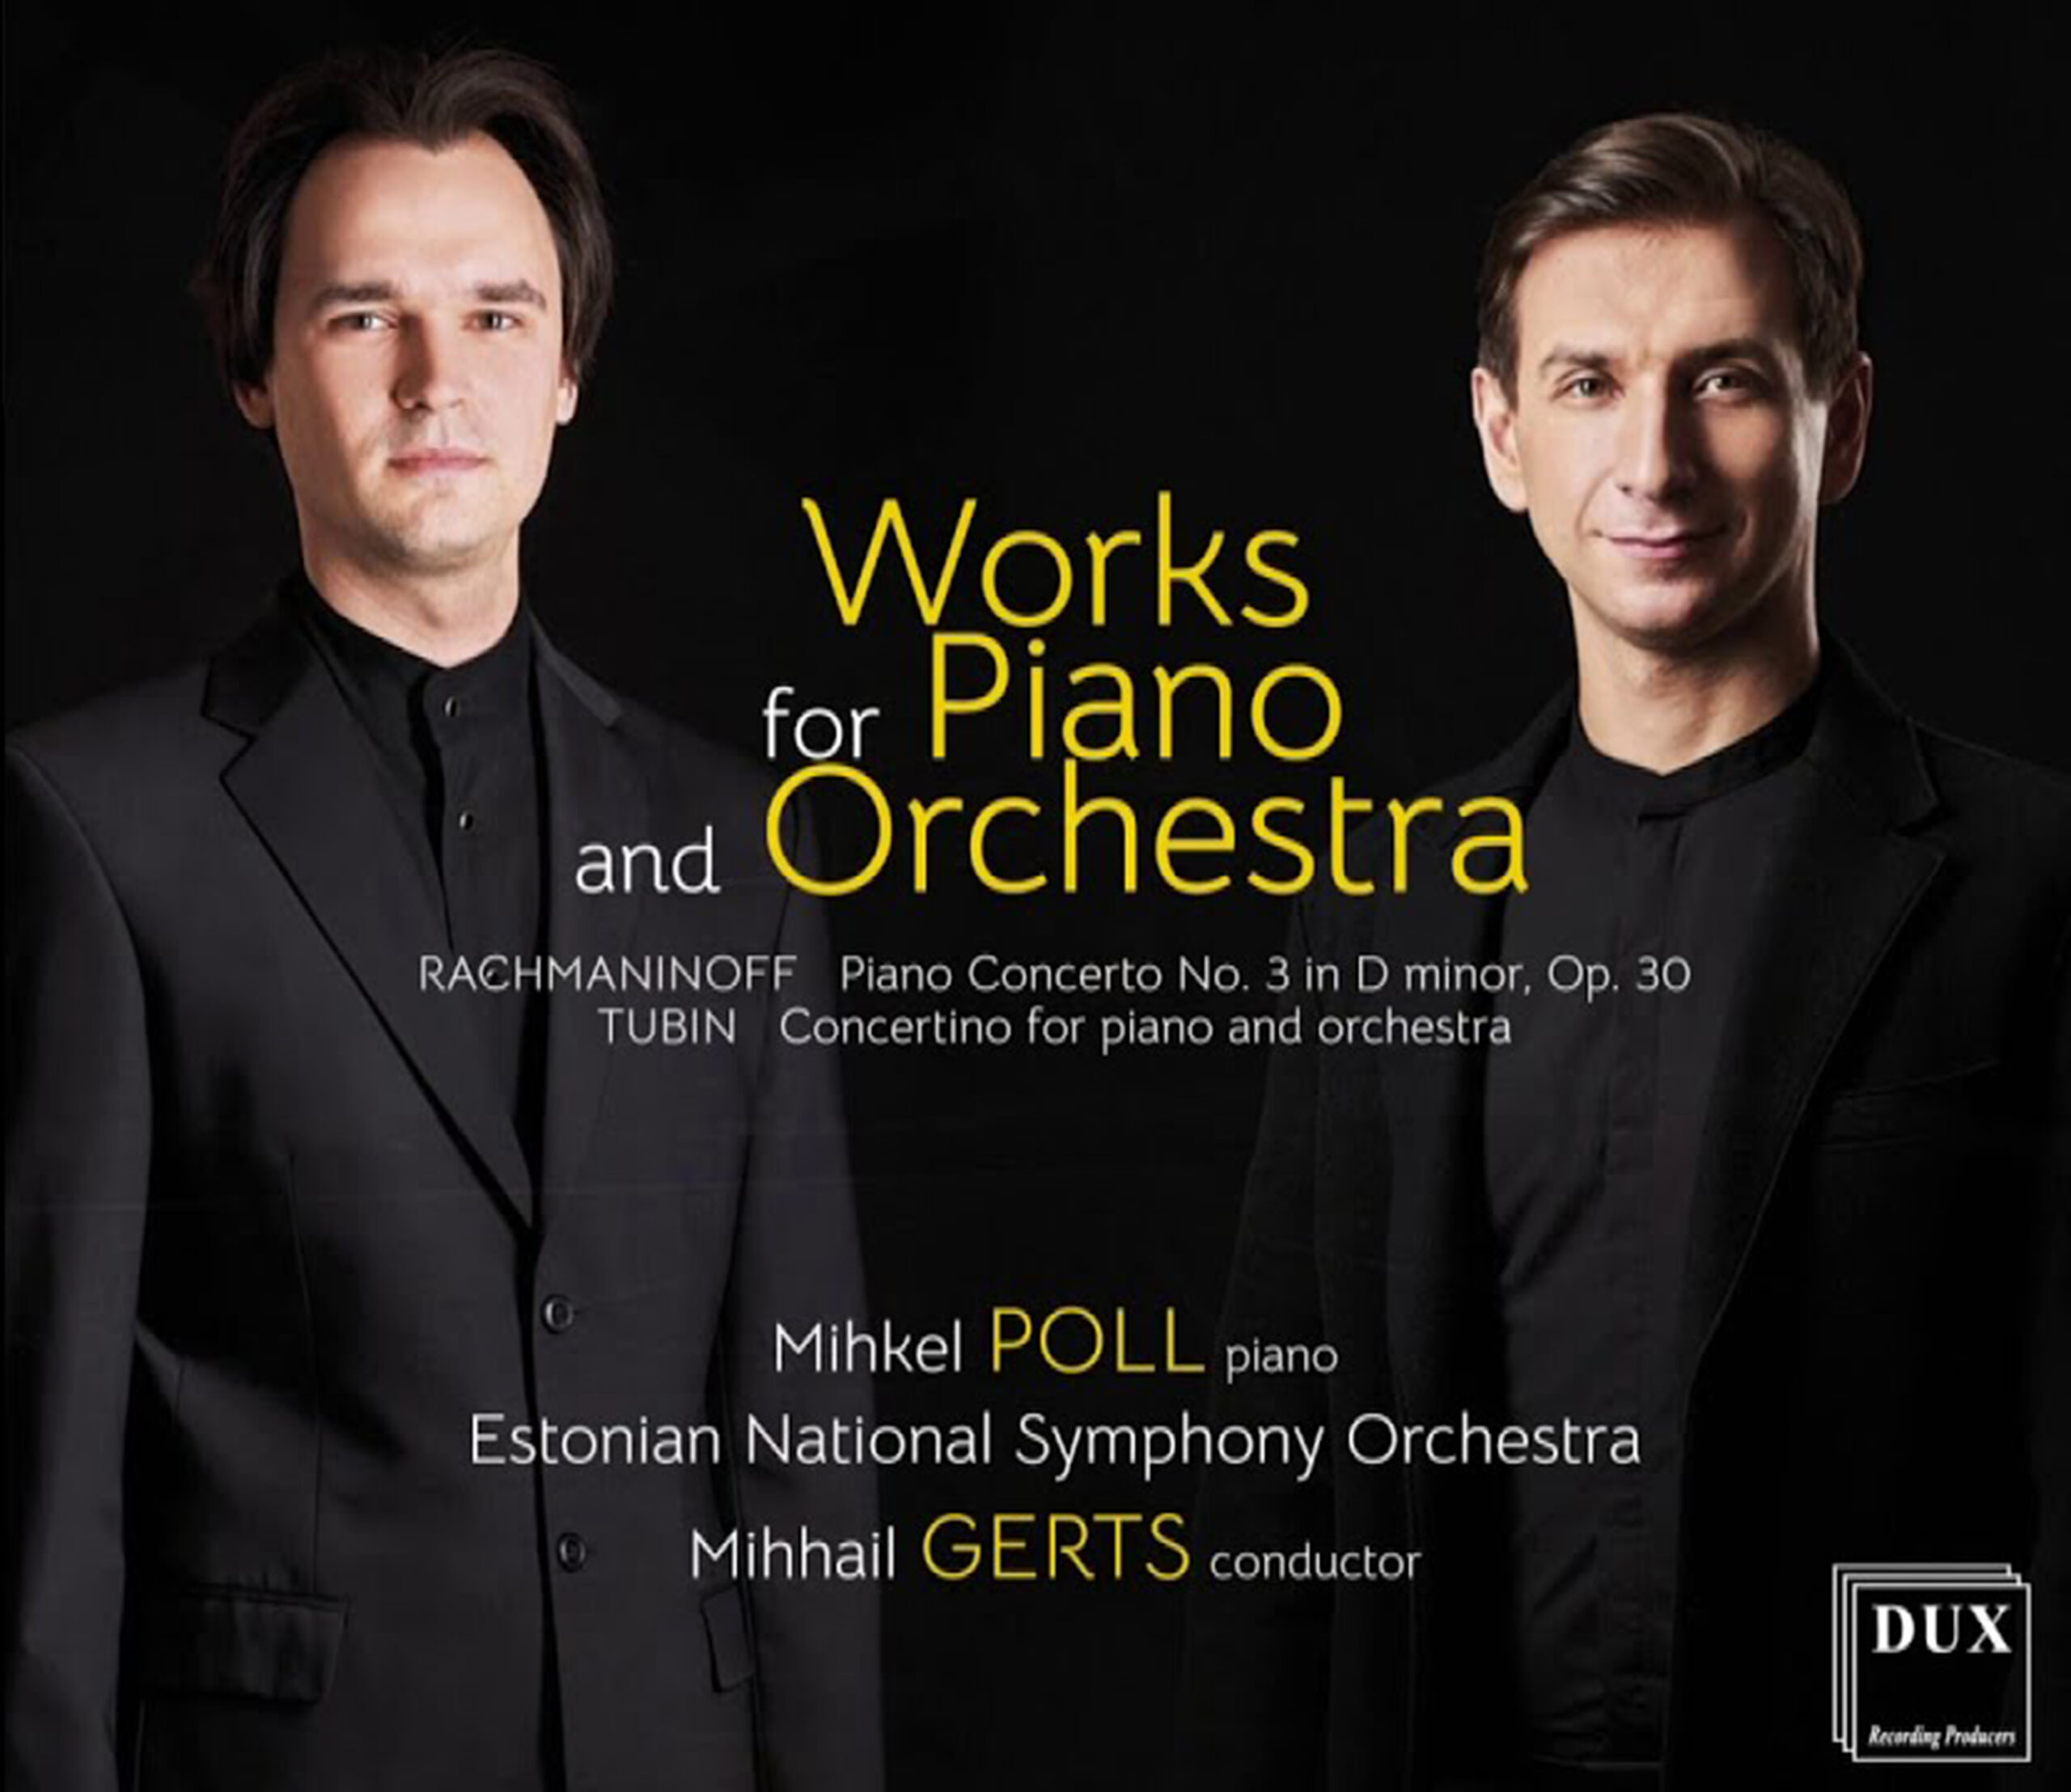 WORKS FOT PIANO AND ORCHESTRA. Mihkel Poll, Mihhail Gerts. Dux 2021